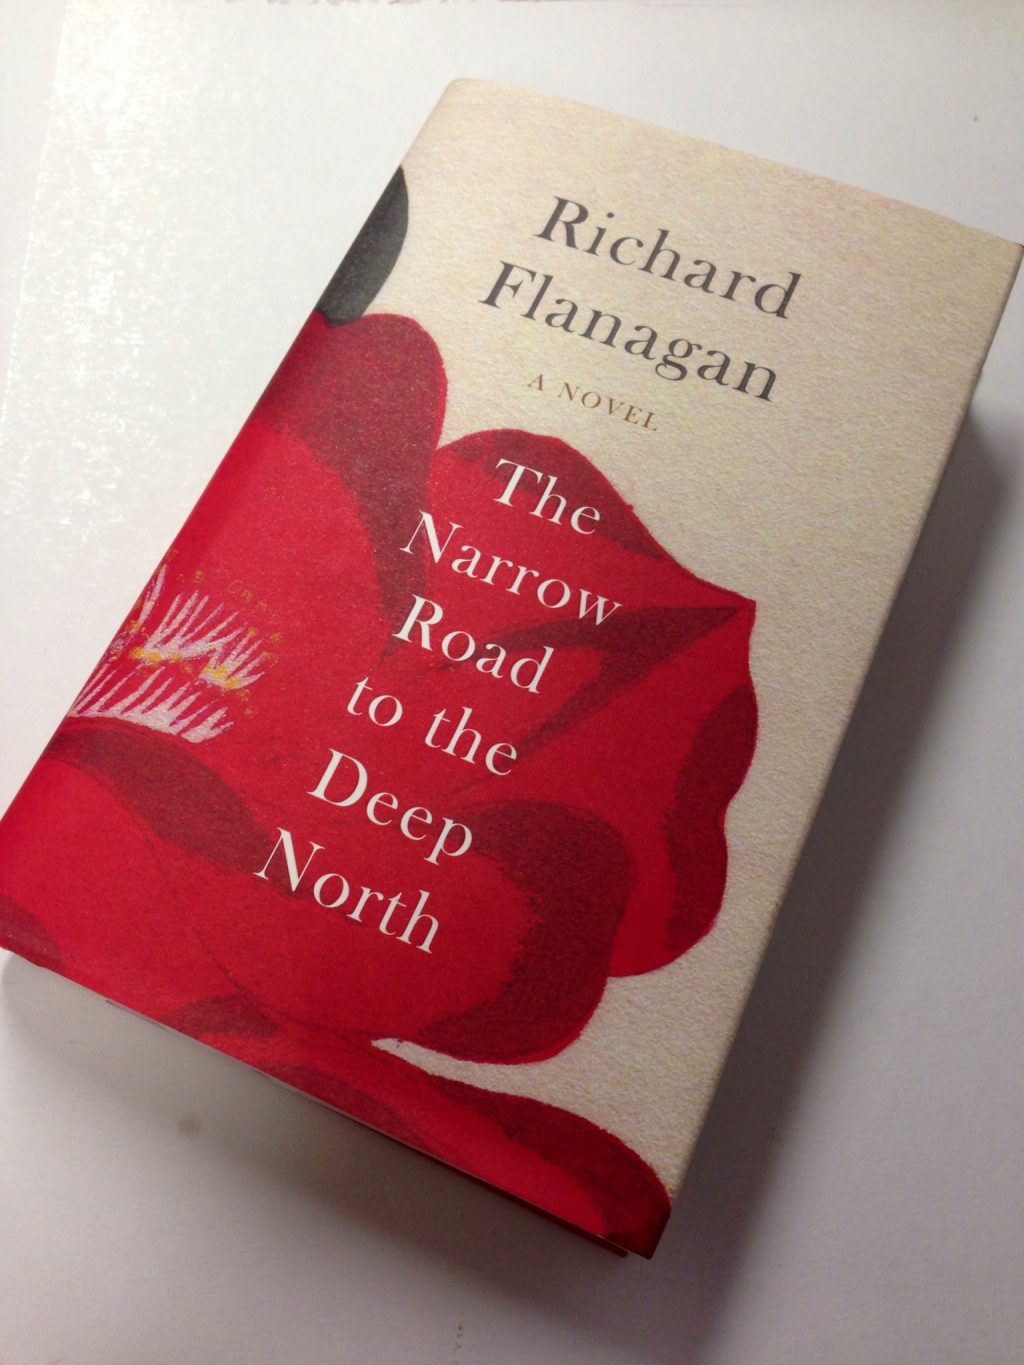 Book Review: The Narrow Road to the Deep North by Richard Flanagan